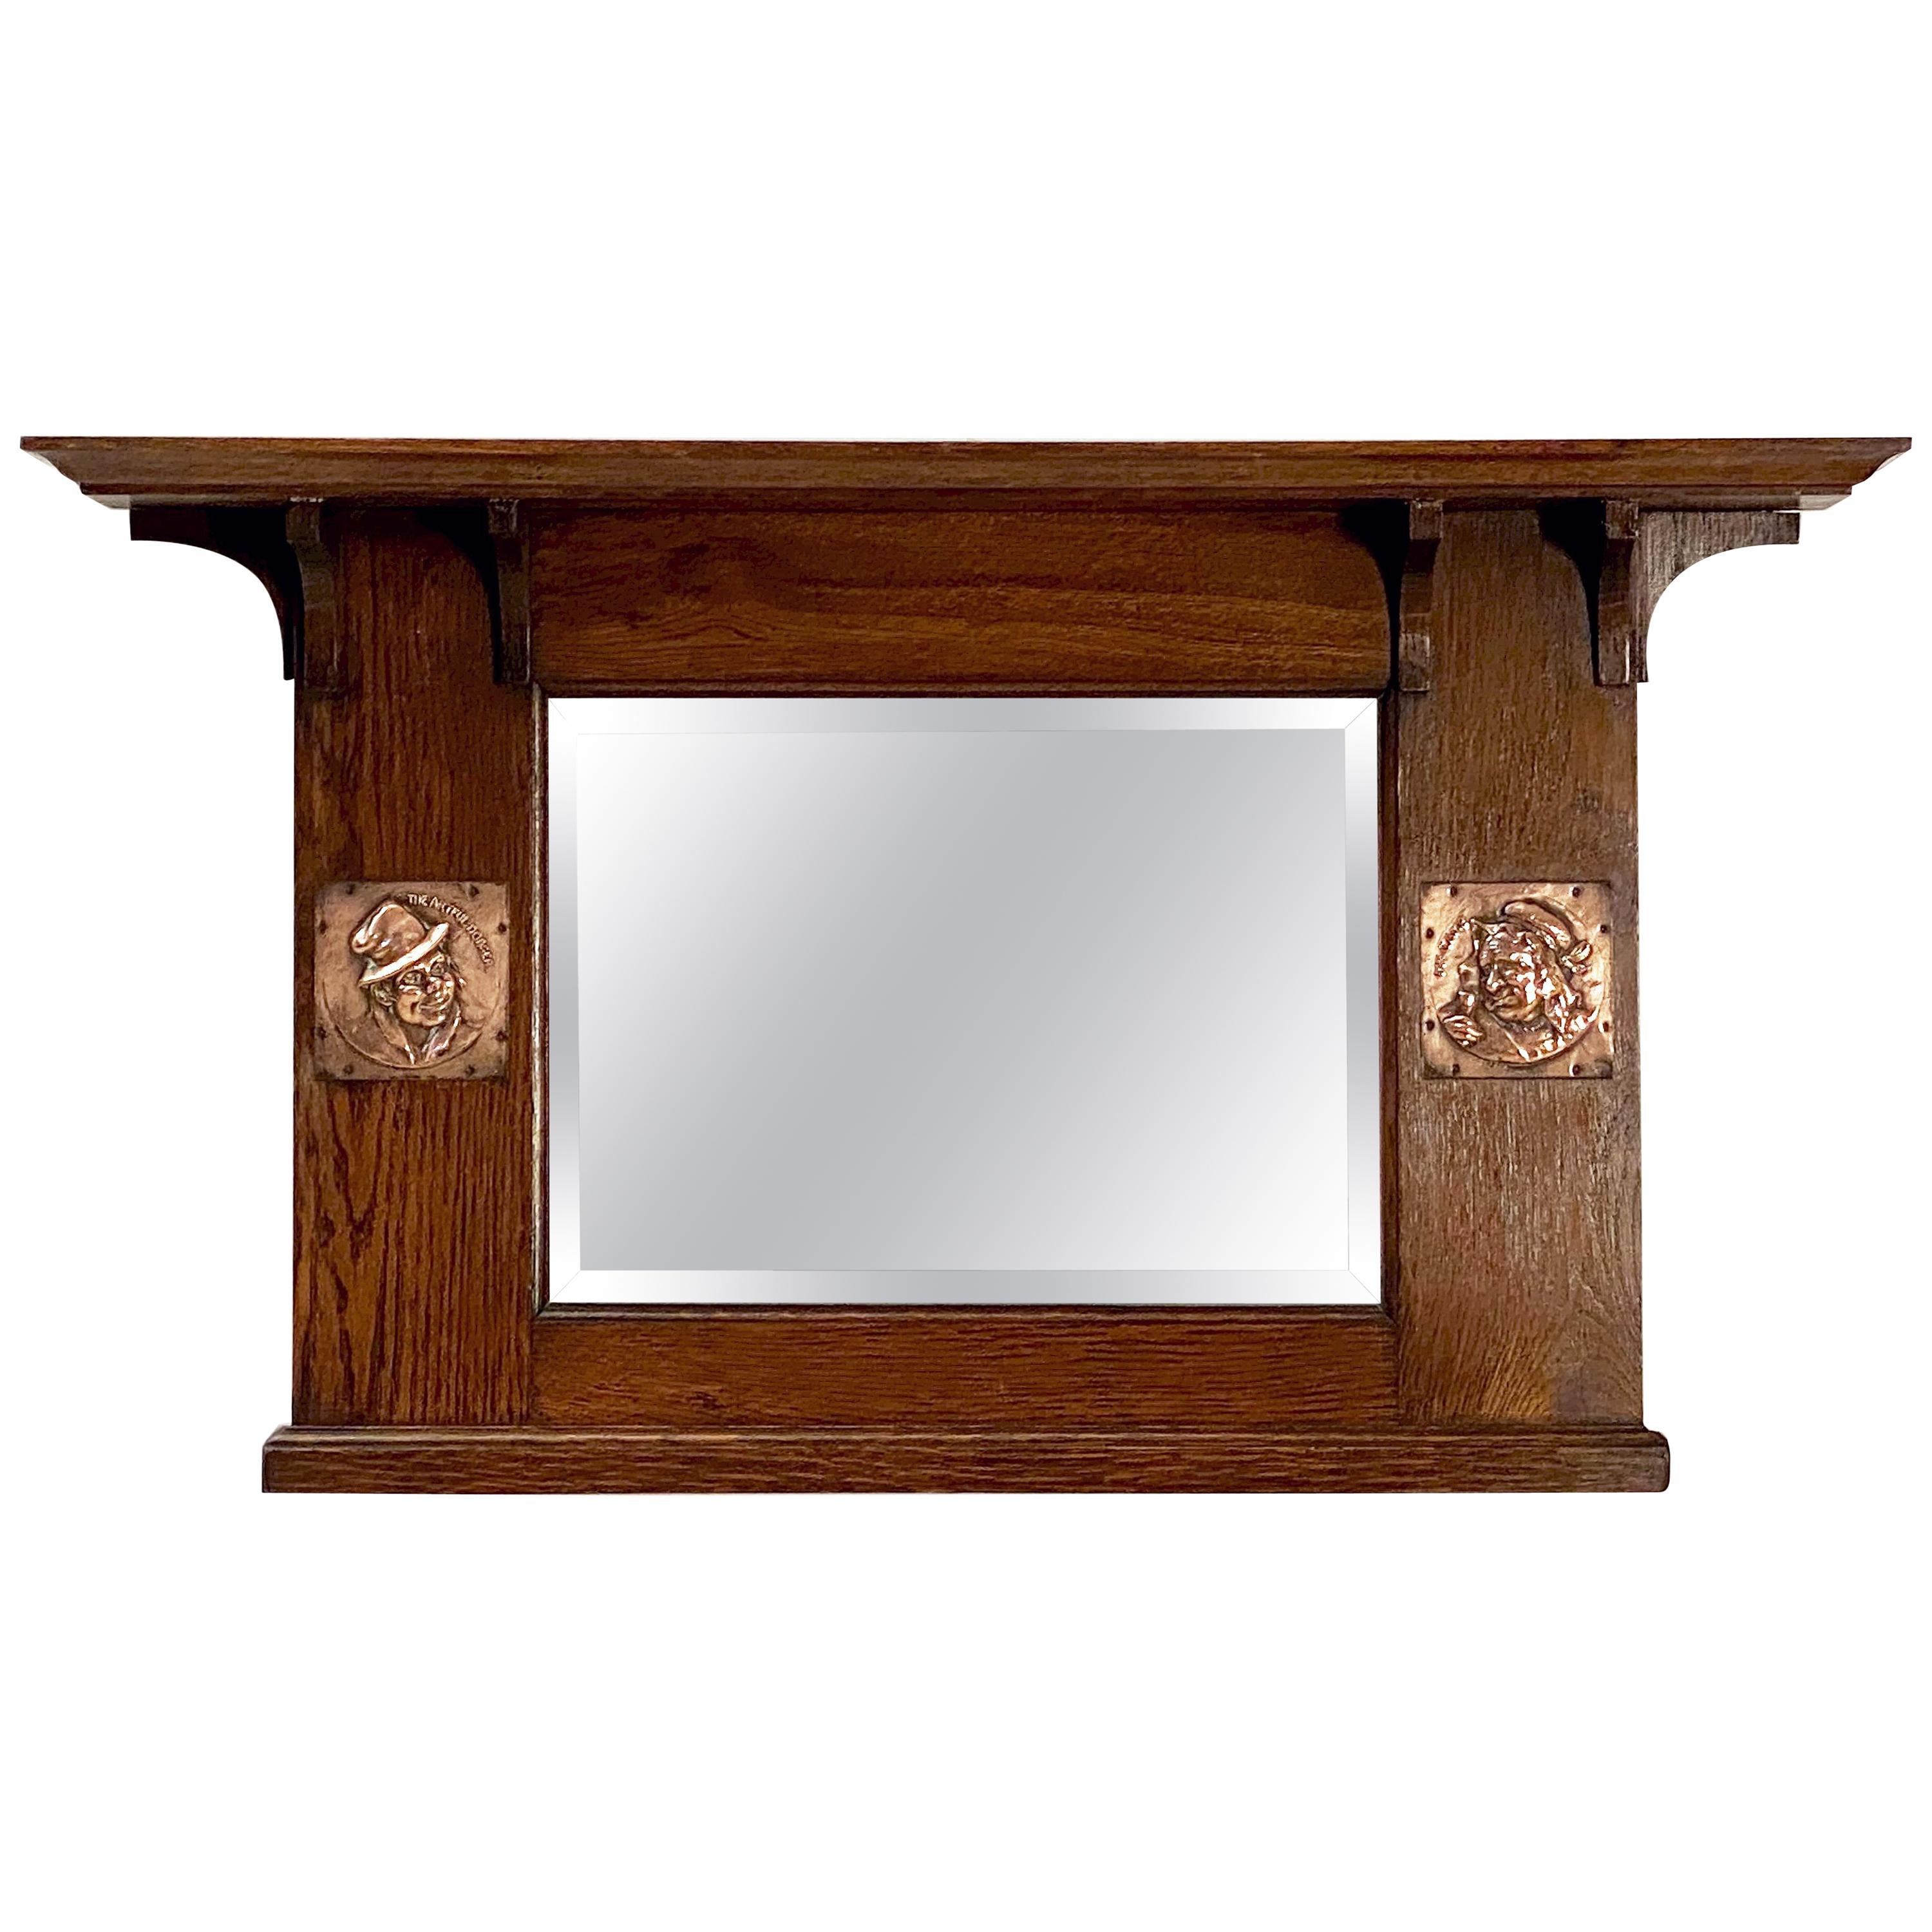 Arts and Crafts Era Beveled Overmantle Mirror with Oak Frame (H 18 x W 32)